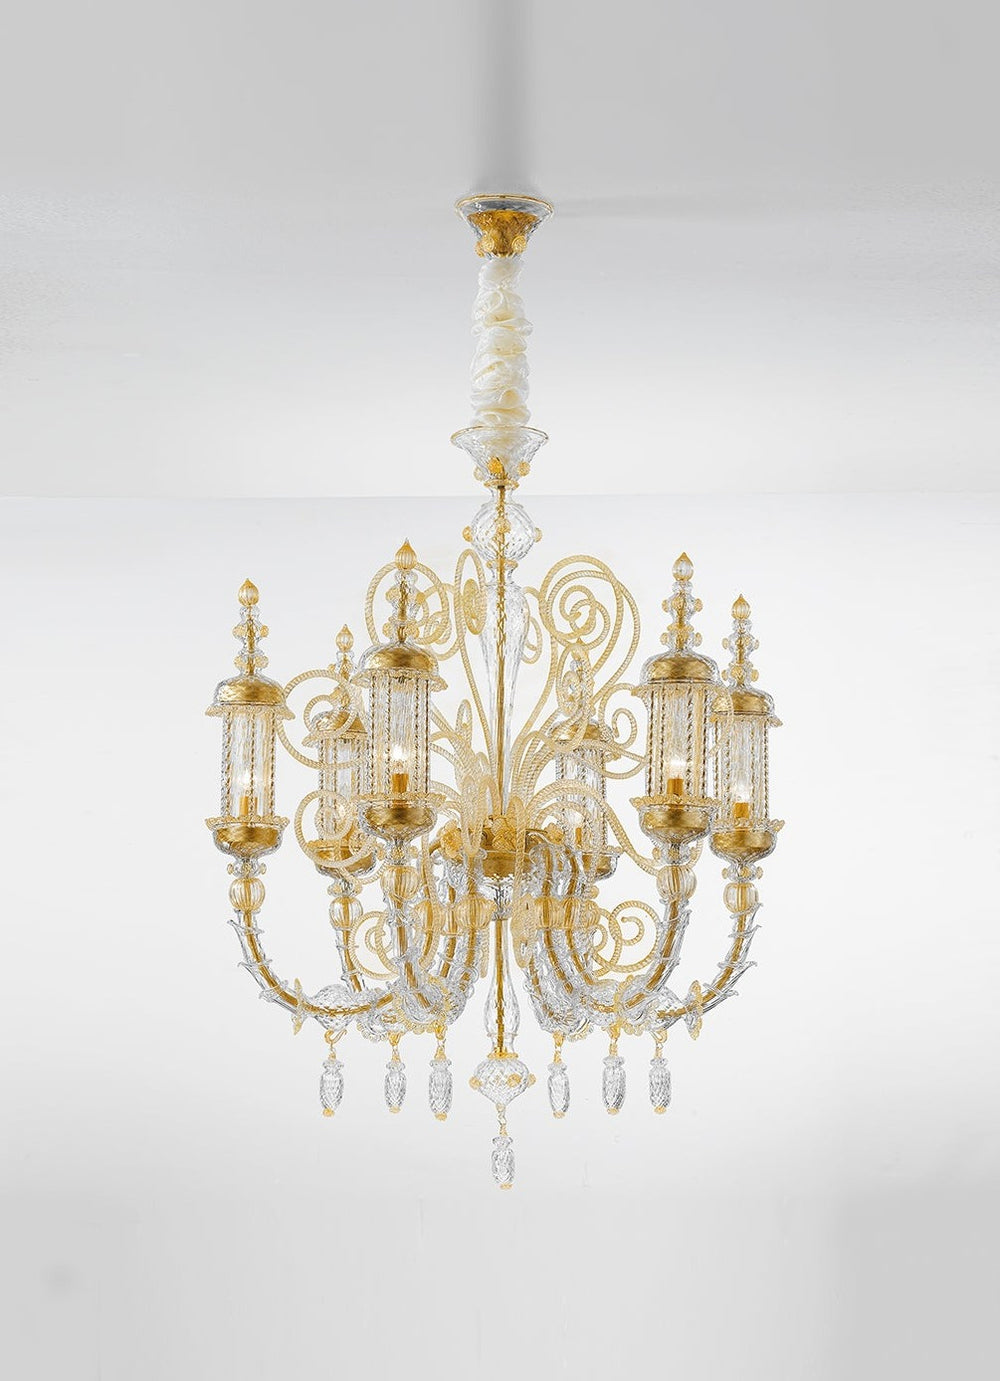 Hand-Blown Ornate Luxurious Ceiling Pendant Chandelier With Six Shades And Murano Glass